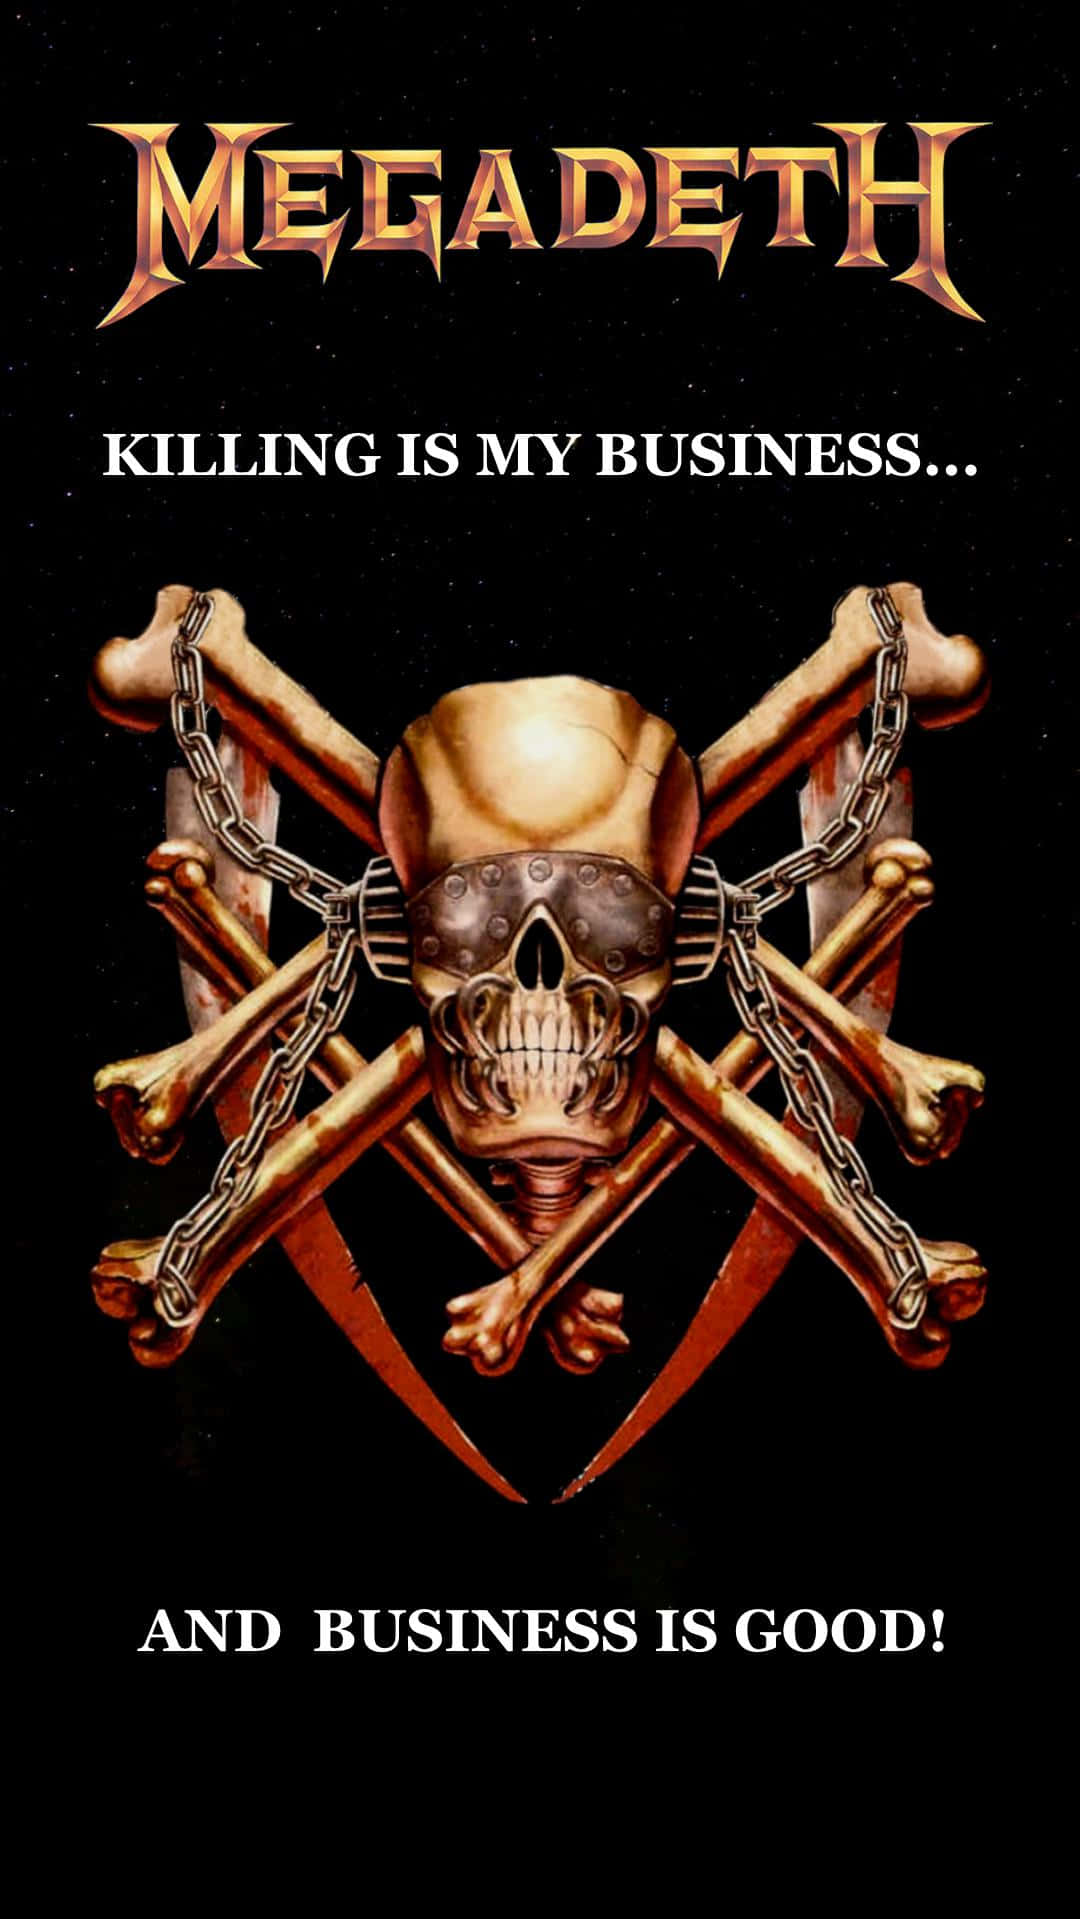 Megadeth Killing Is My Business Album Cover Wallpaper